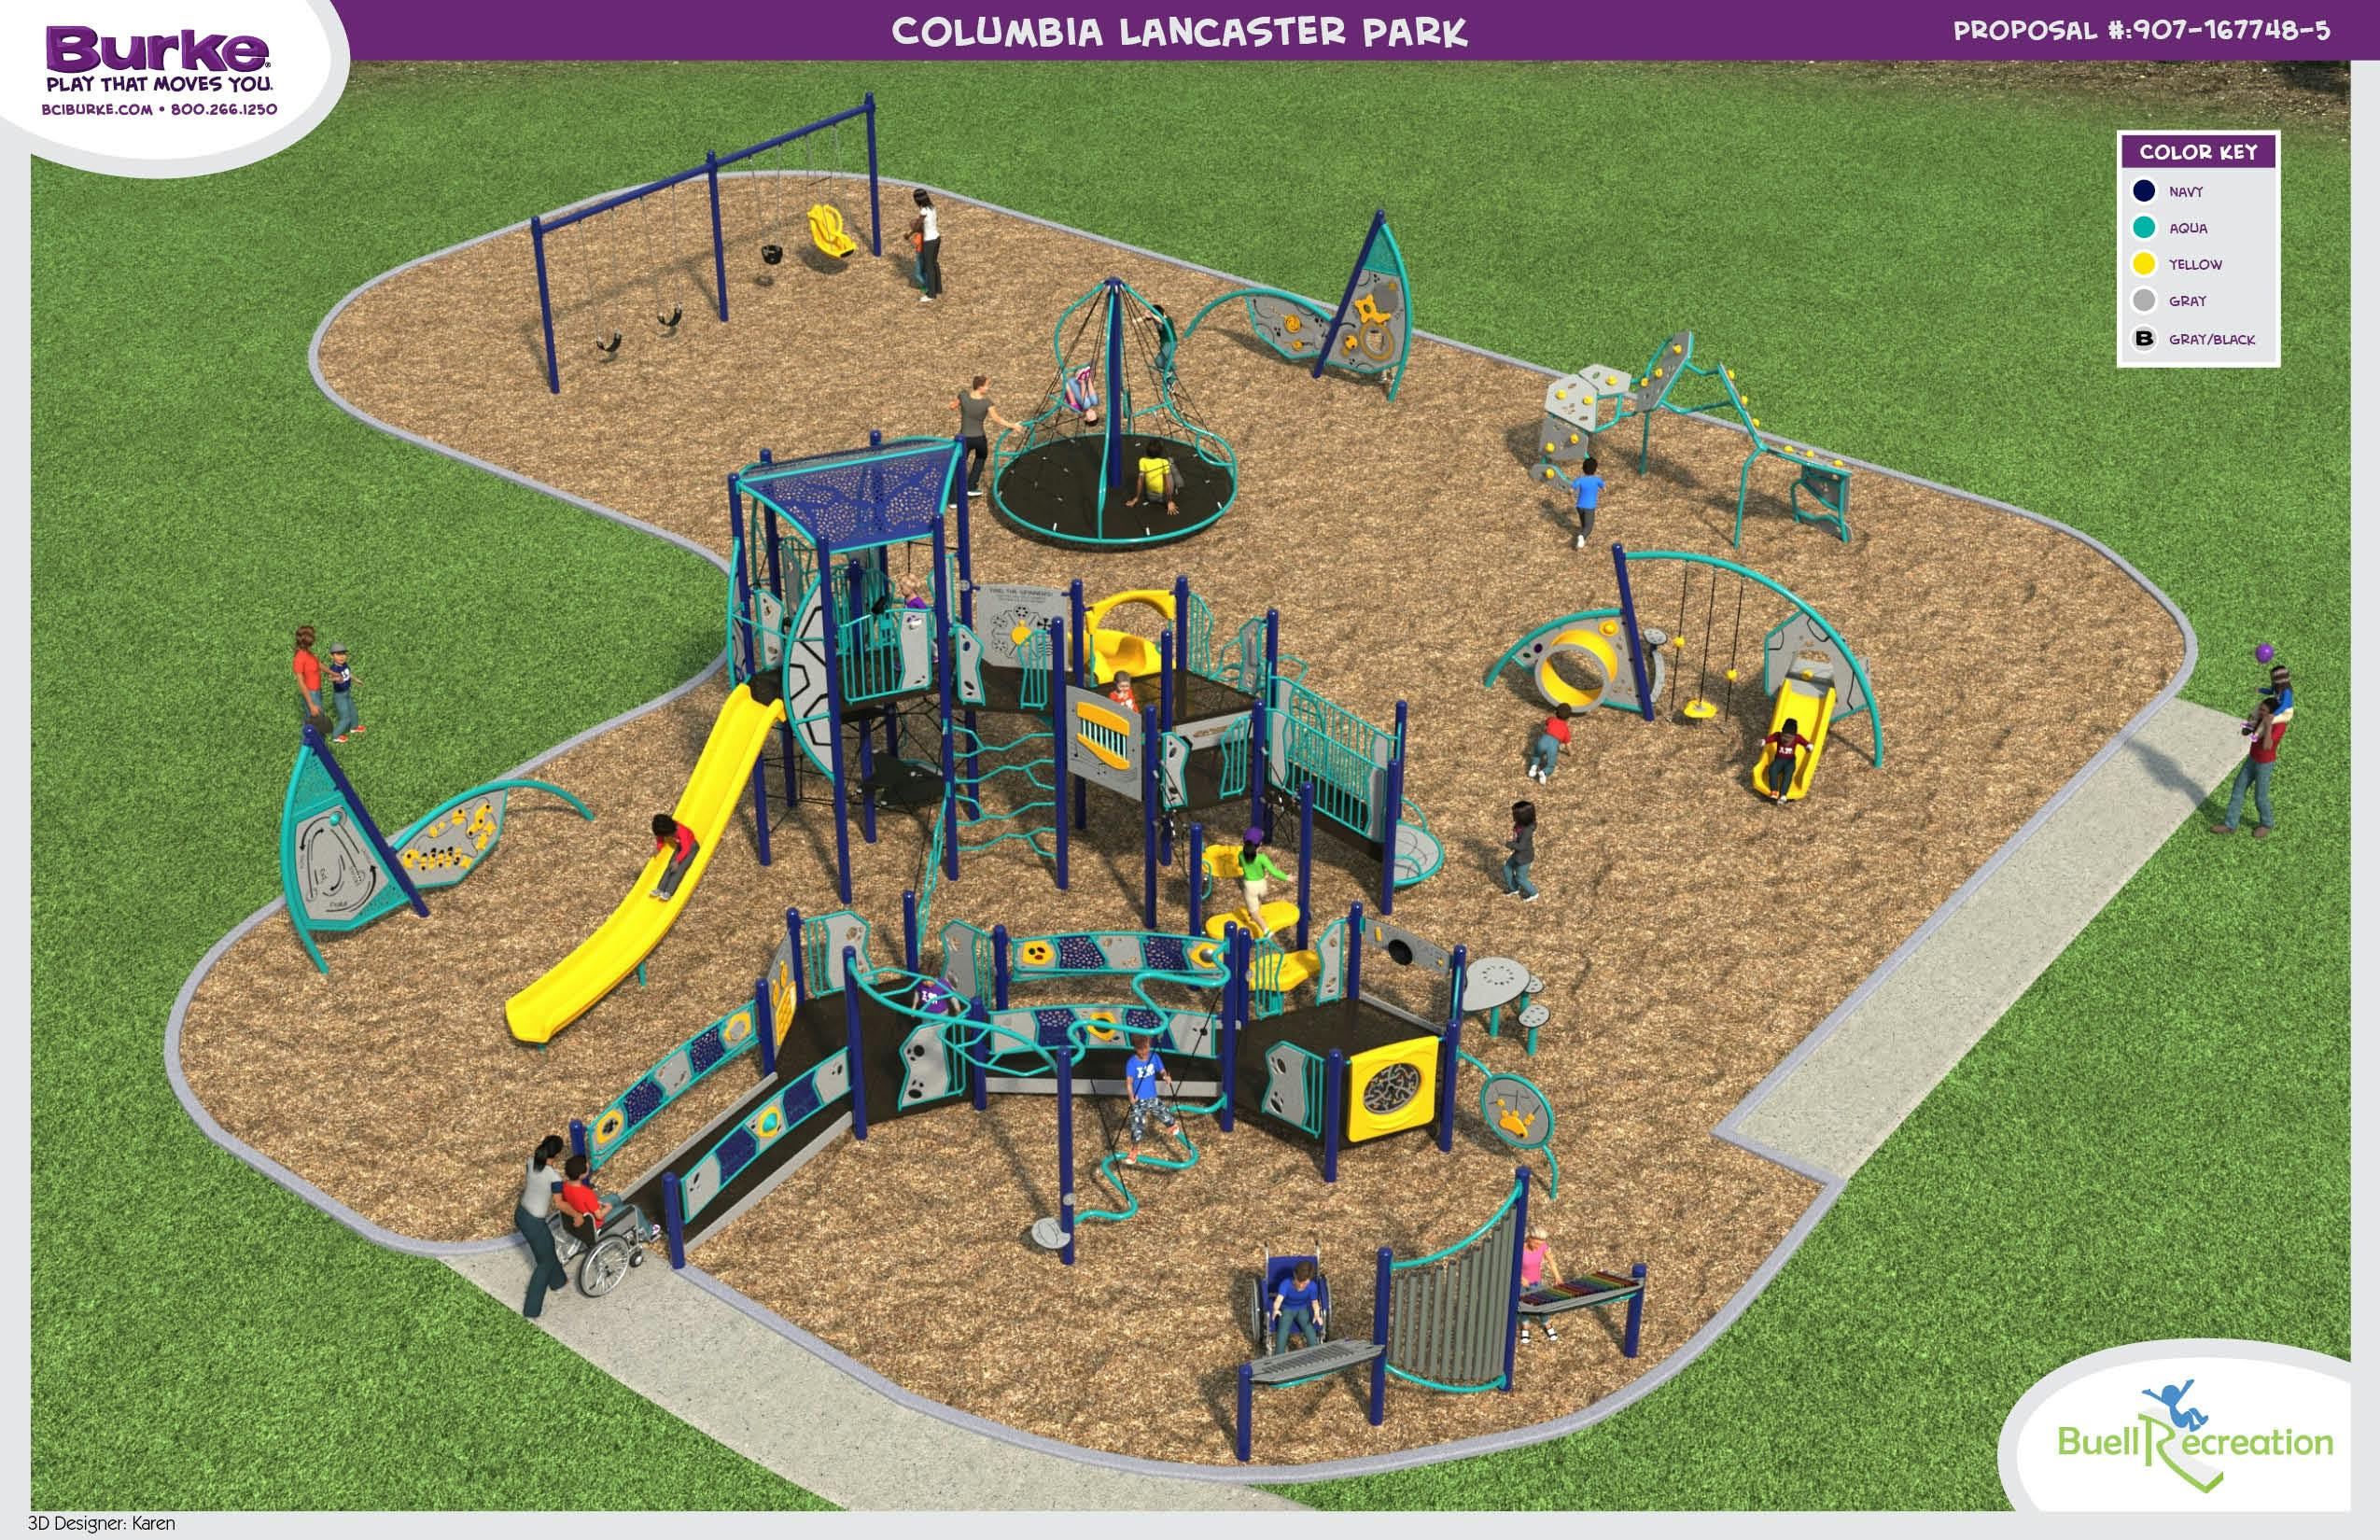 Aerial rendering of the new Columbia Lancaster Playground